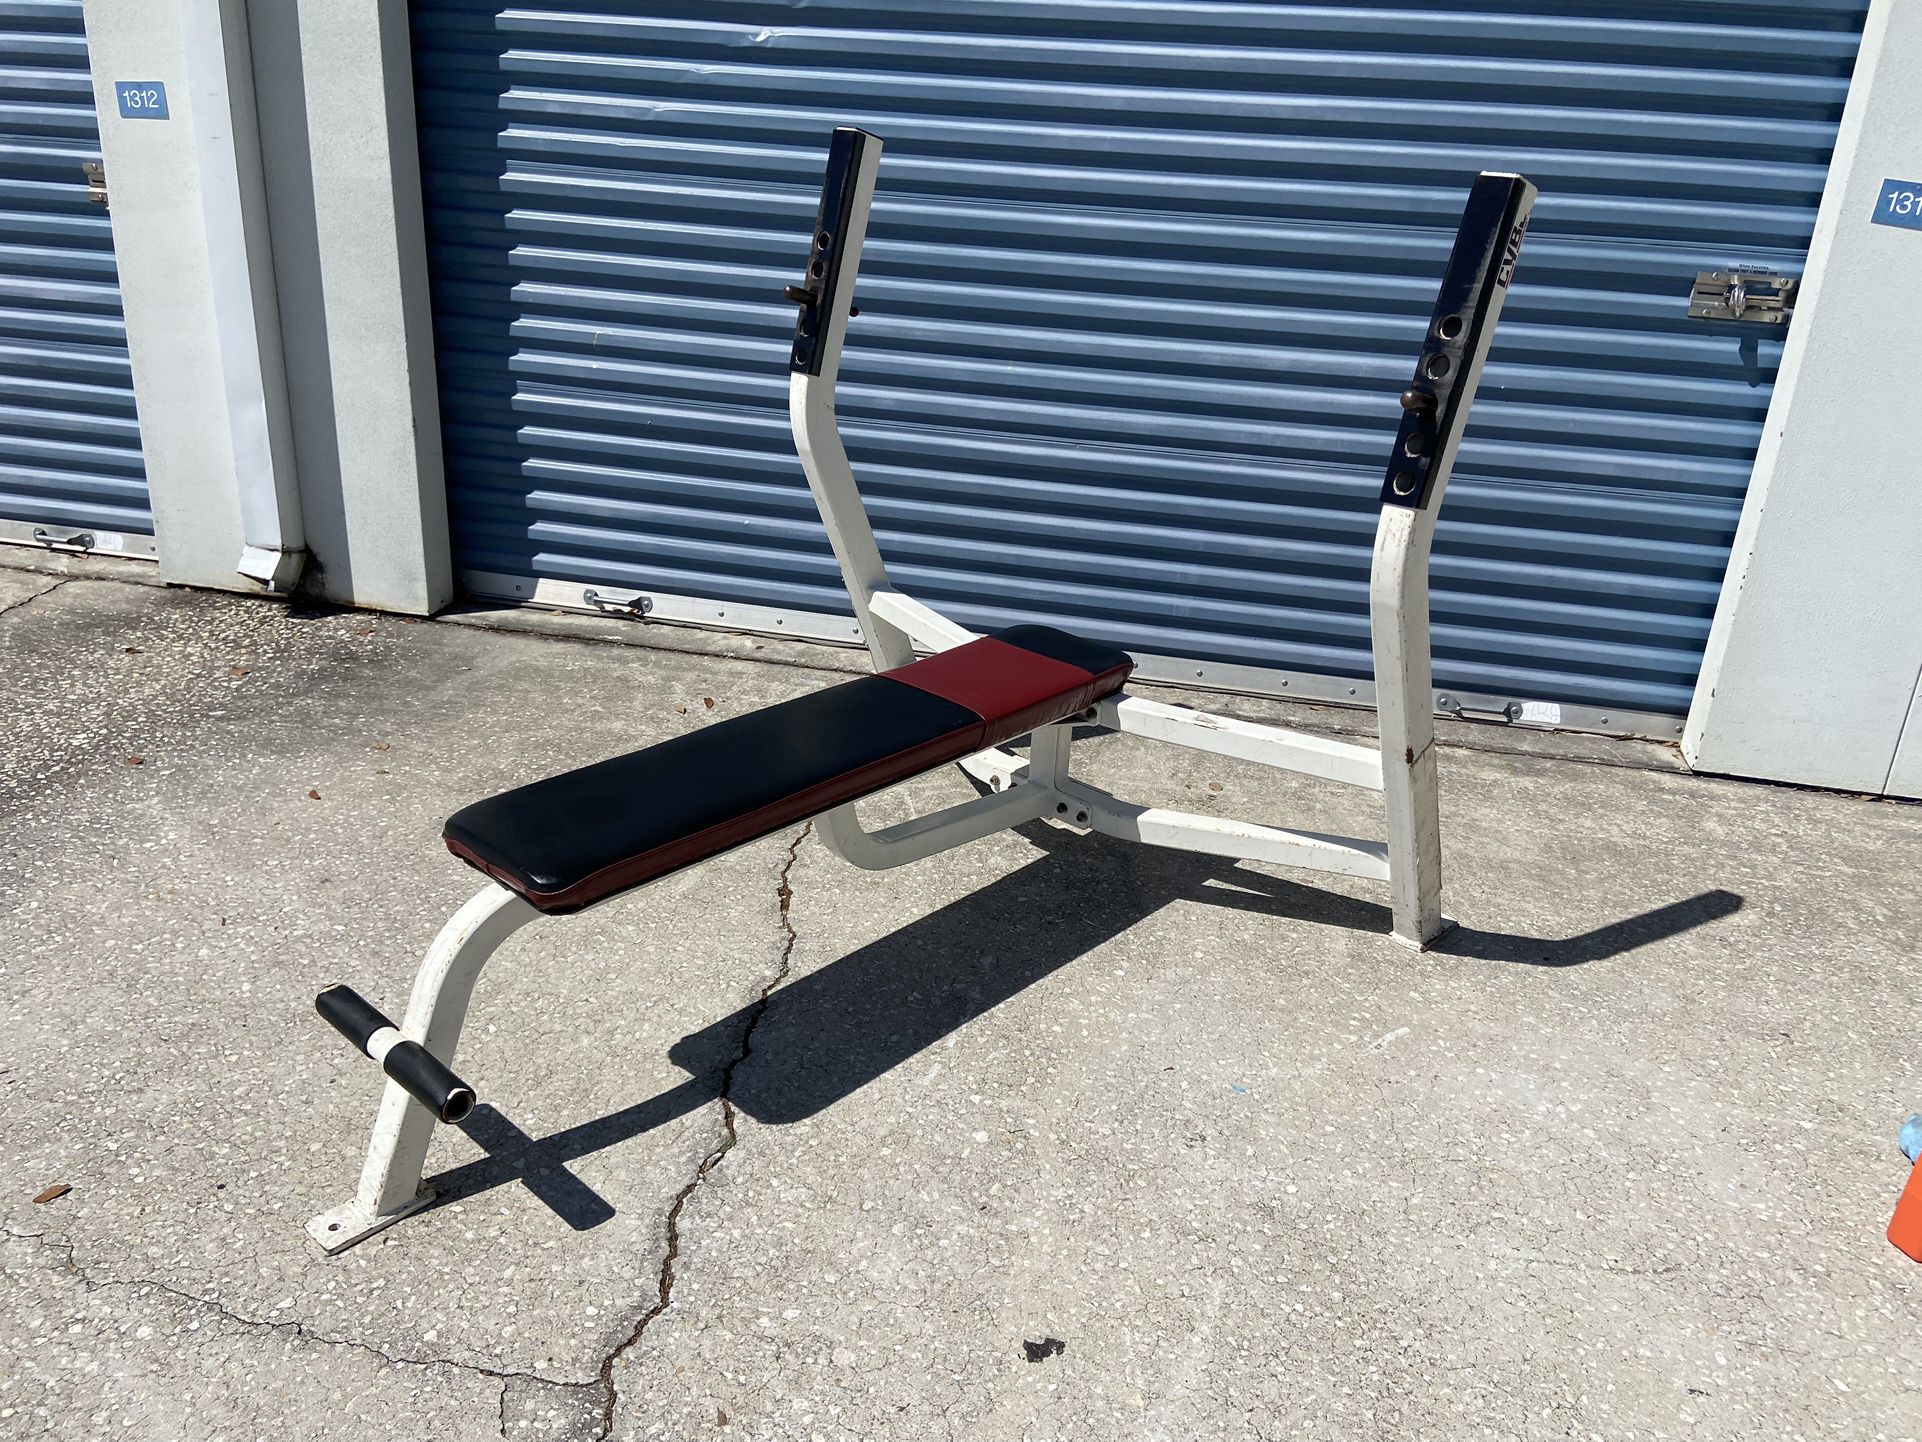 Cybex Olympic flat weight bench